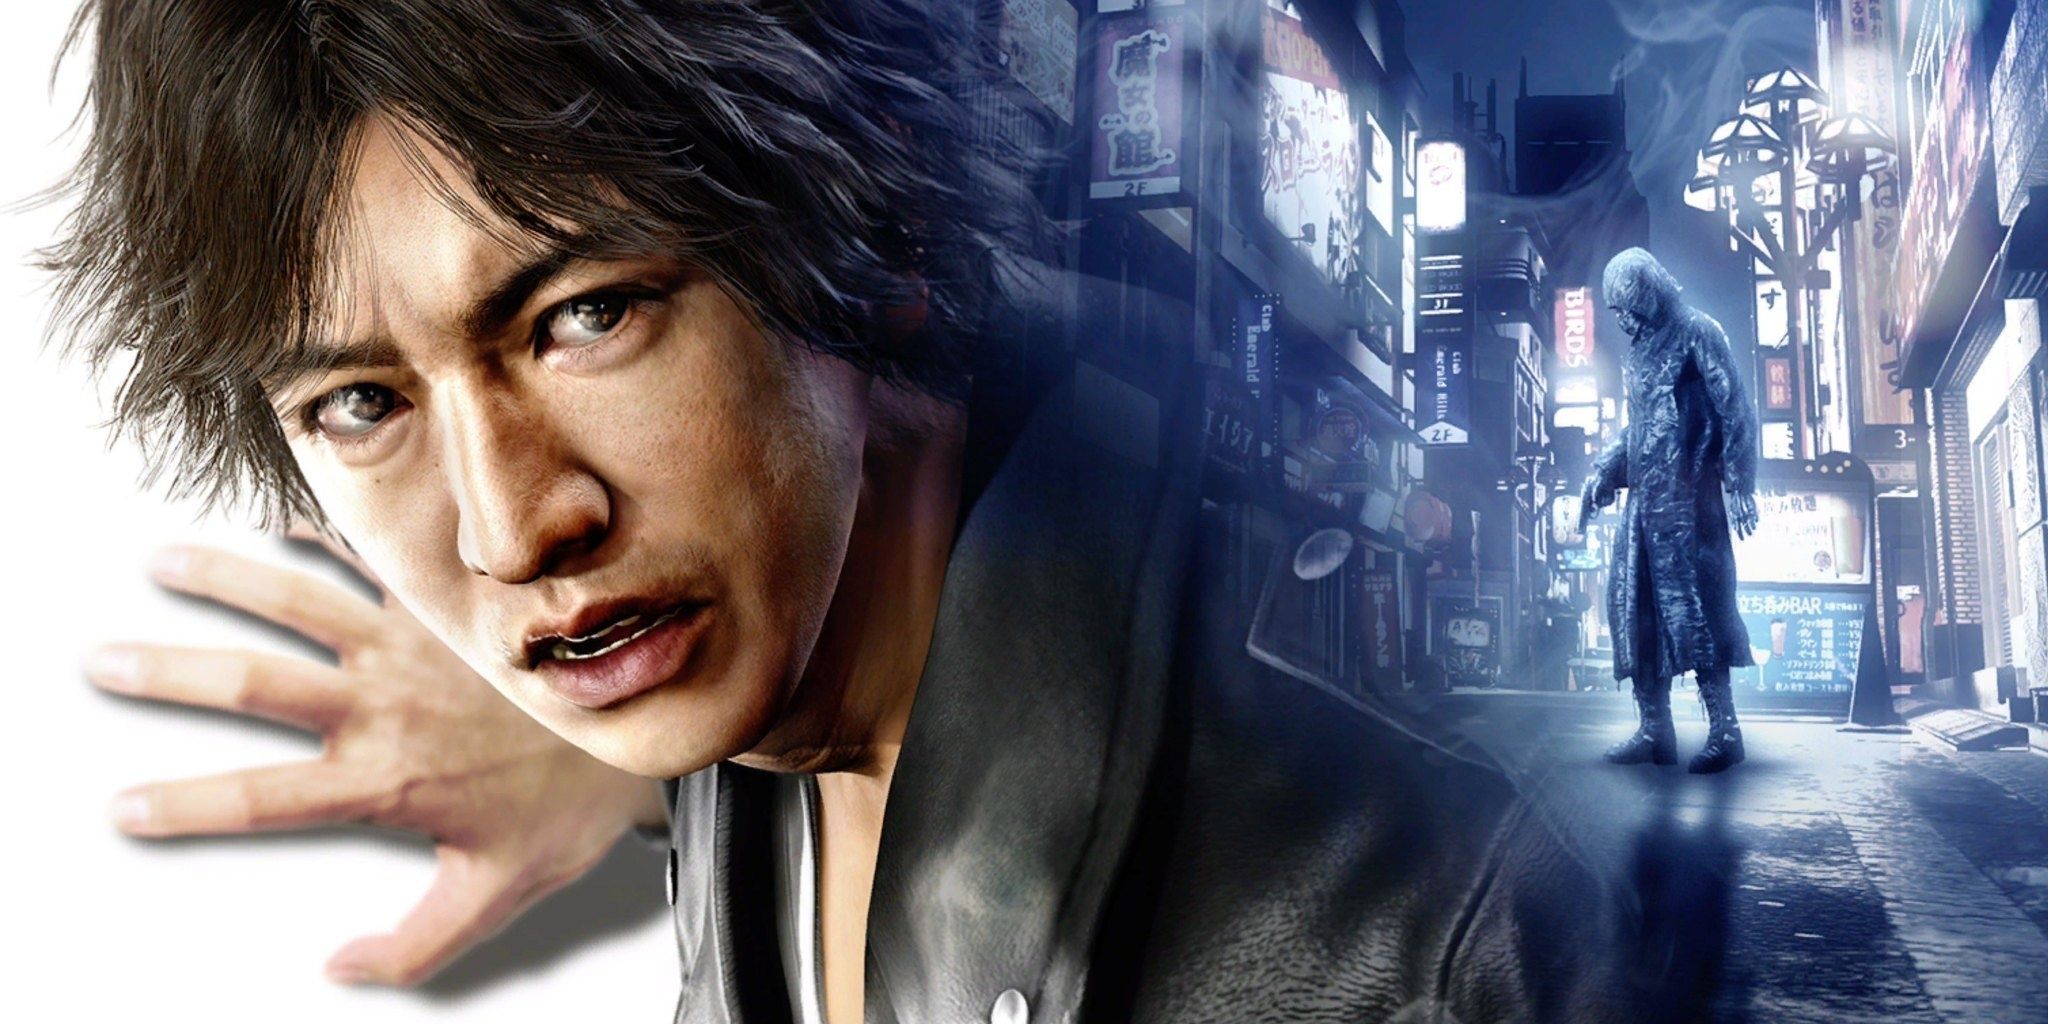 Judgment yagami promotional material